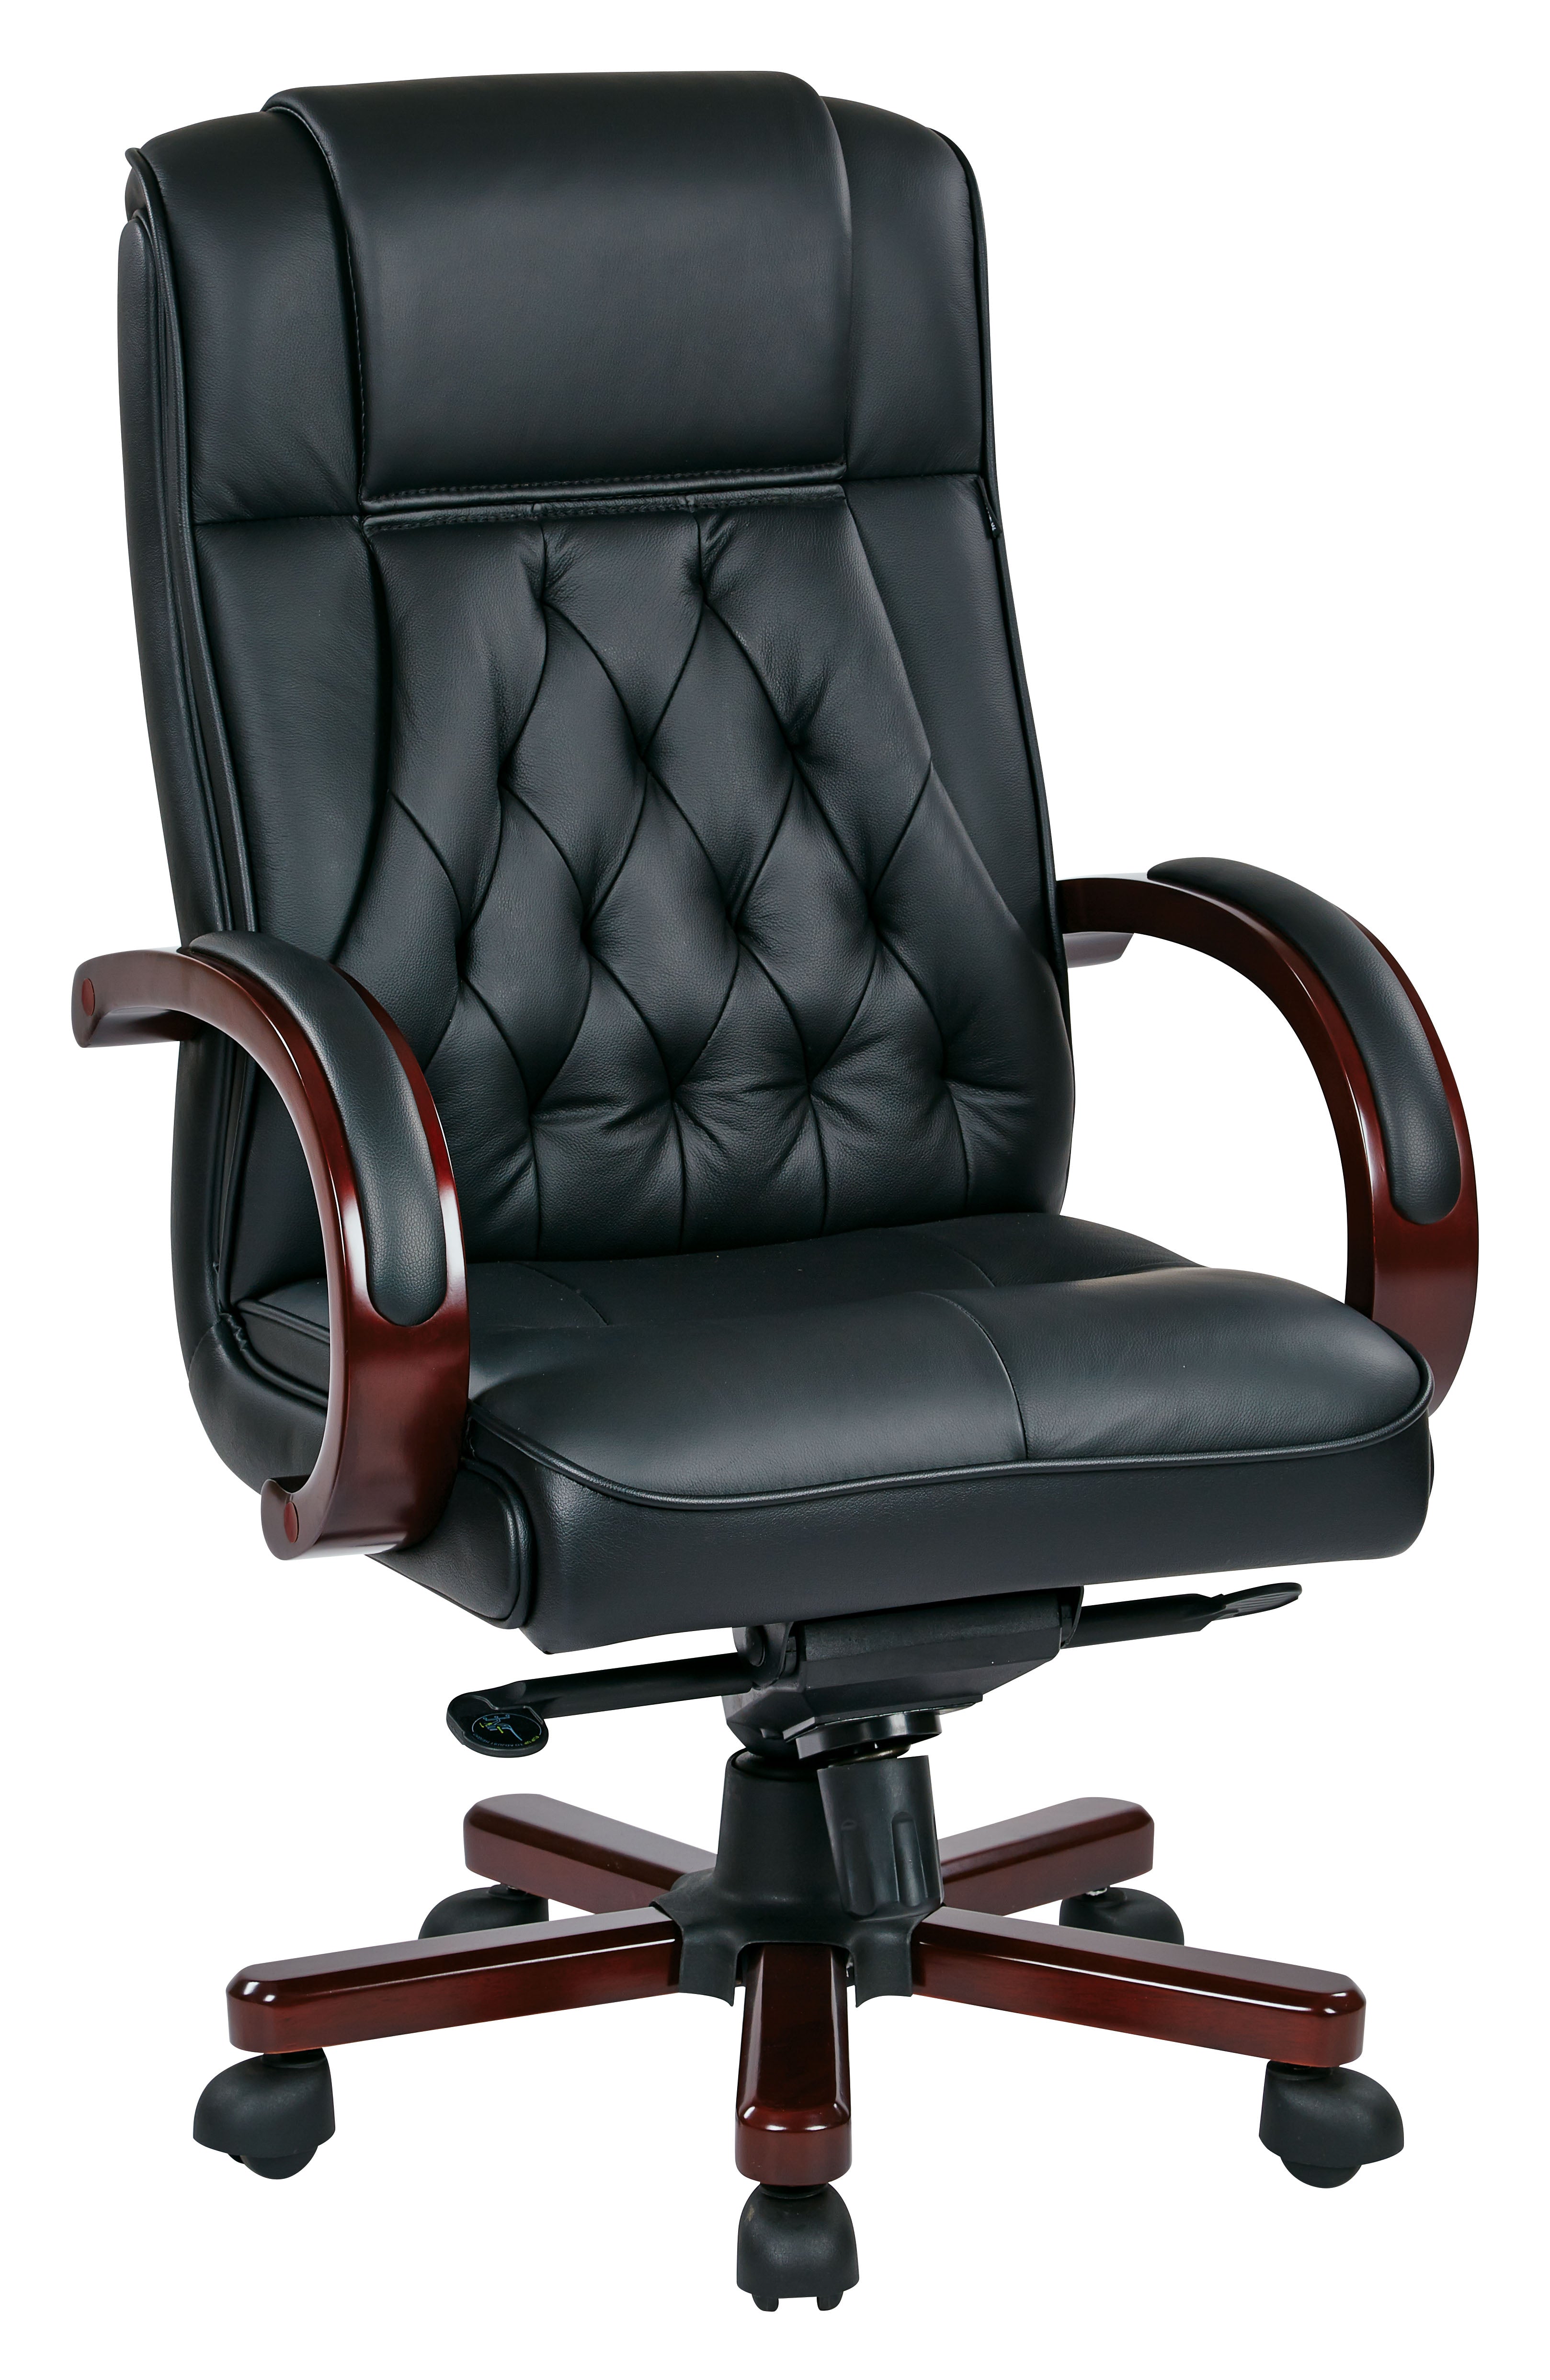 TWN300L - Tradittional High Back Executive Leather Office Chair by Office Star